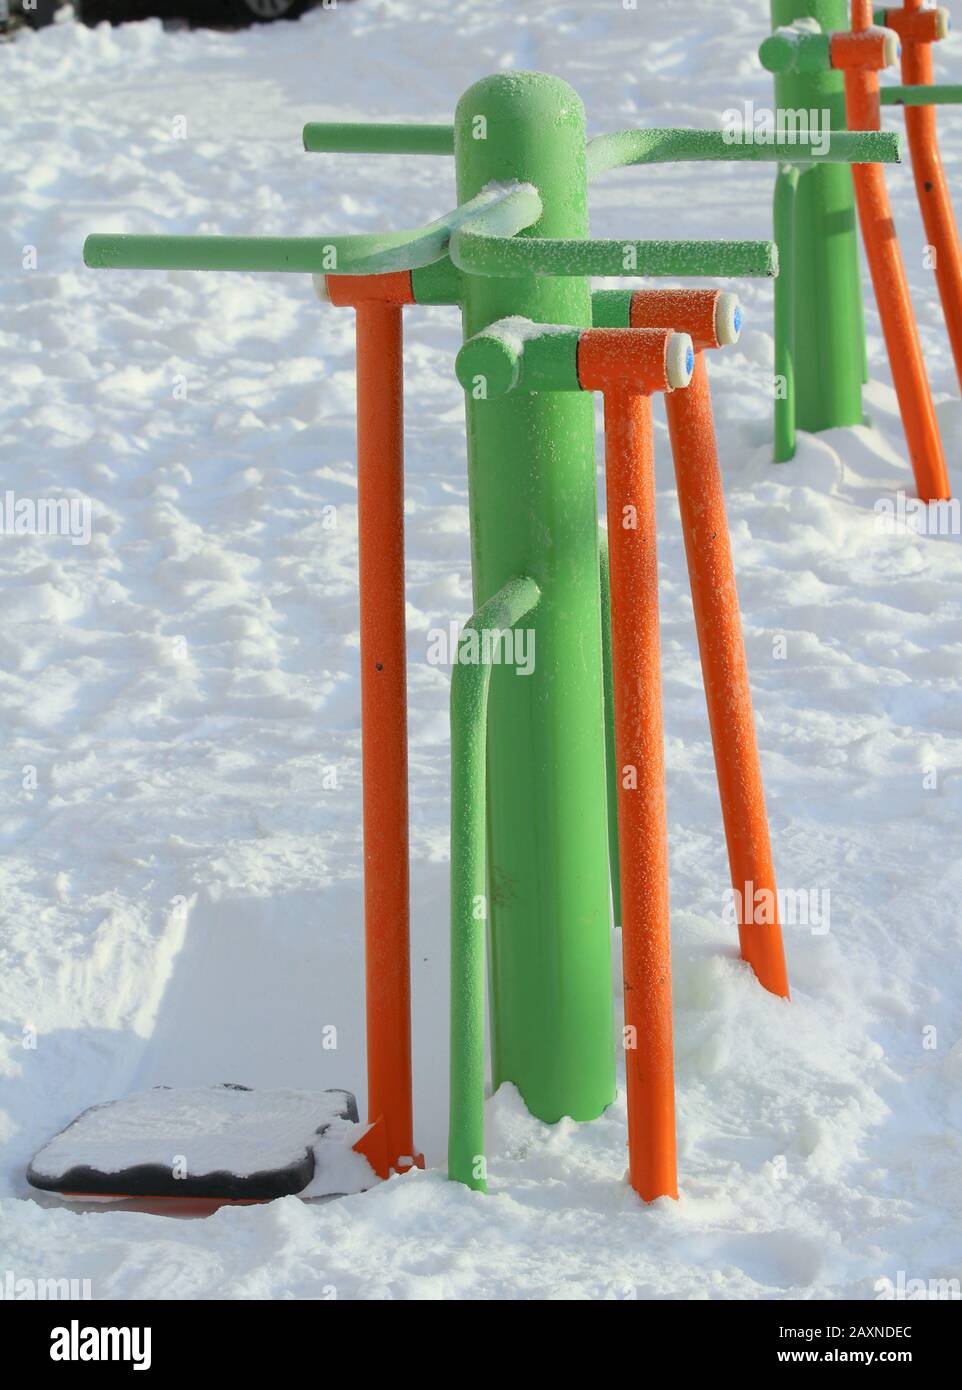 Outdoor fitness equipment on winter urban background, concept of active winter recreation, health care. Vibrant cheerful greens and oranges color. Stock photo with empty space for text. Stock Photo